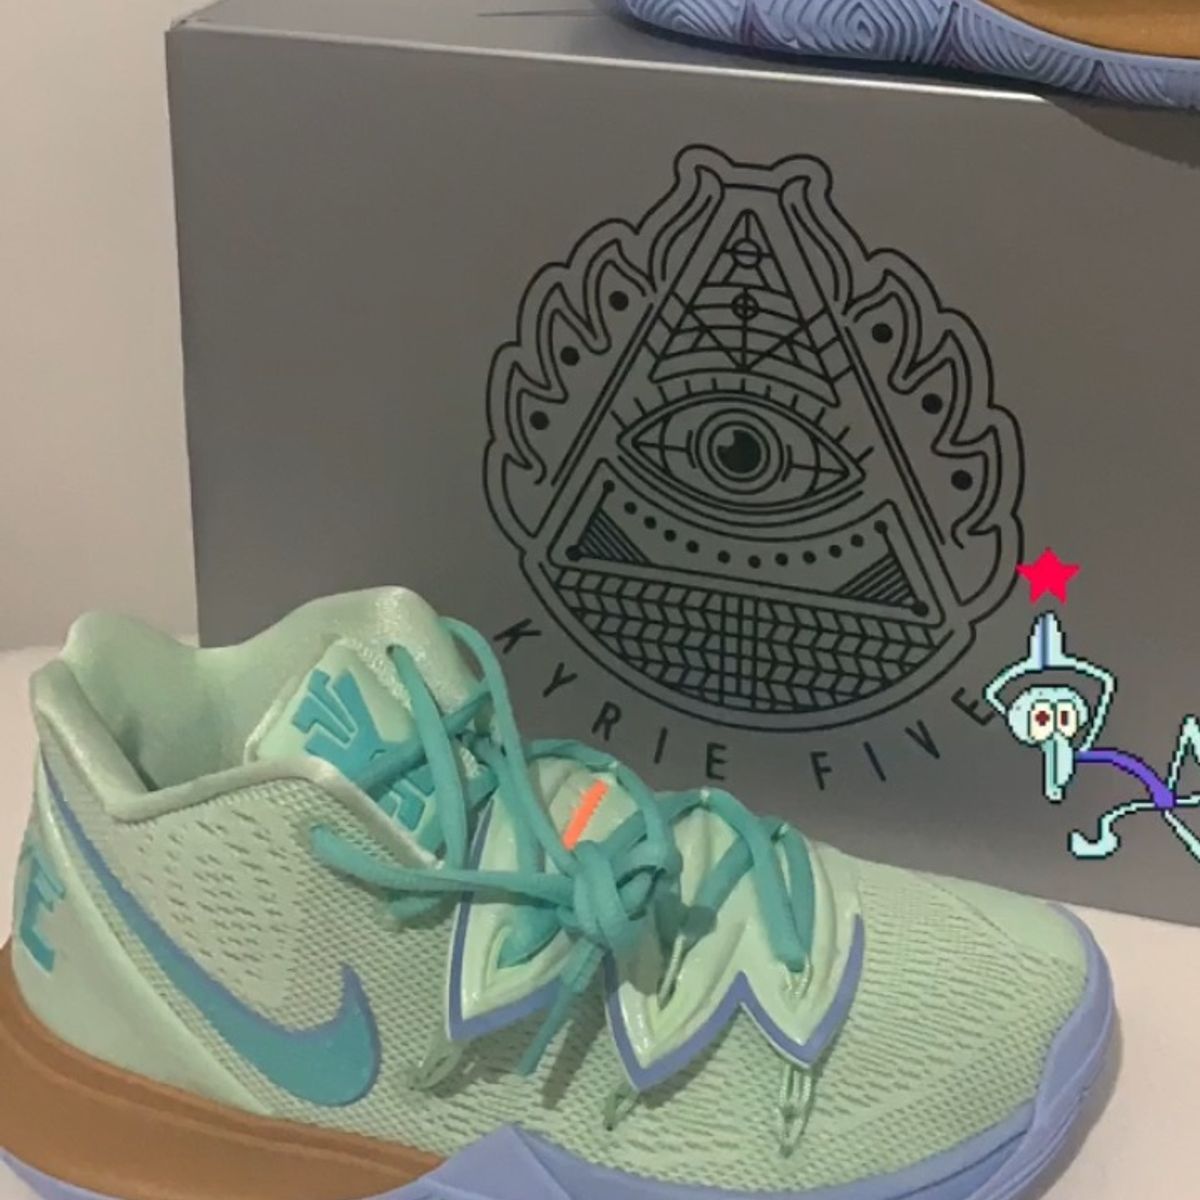 Kyrie 5 and kyrie fly trap 2 un boxing 's YouTube